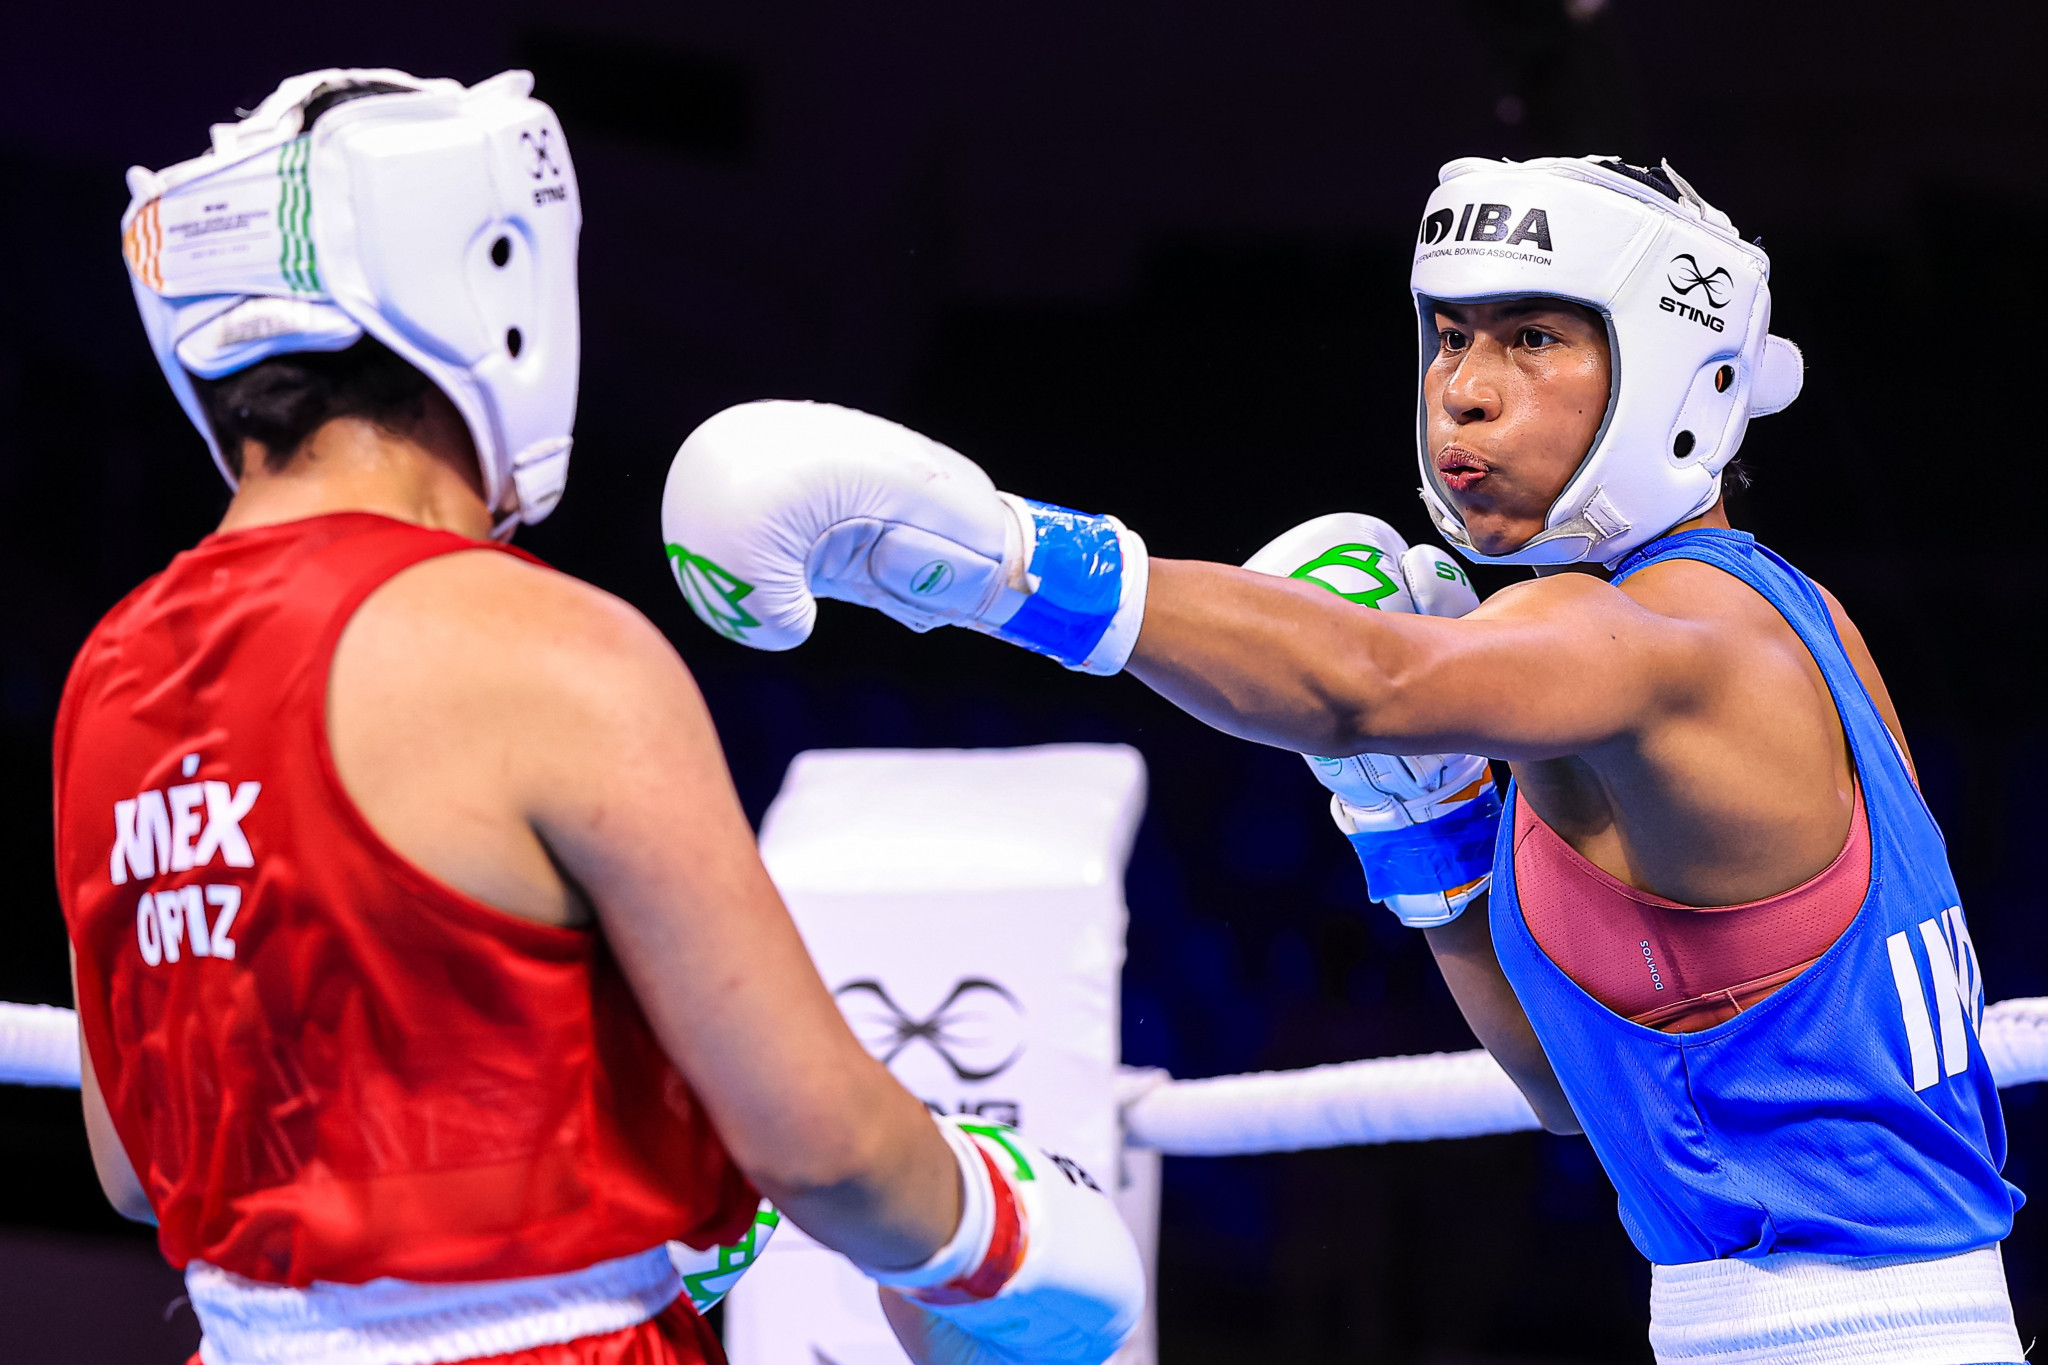 Indian boxing star Lovlina Borgohain, who is chair of the IBA Athletes' Committee, is set to speak at the conference ©IBA